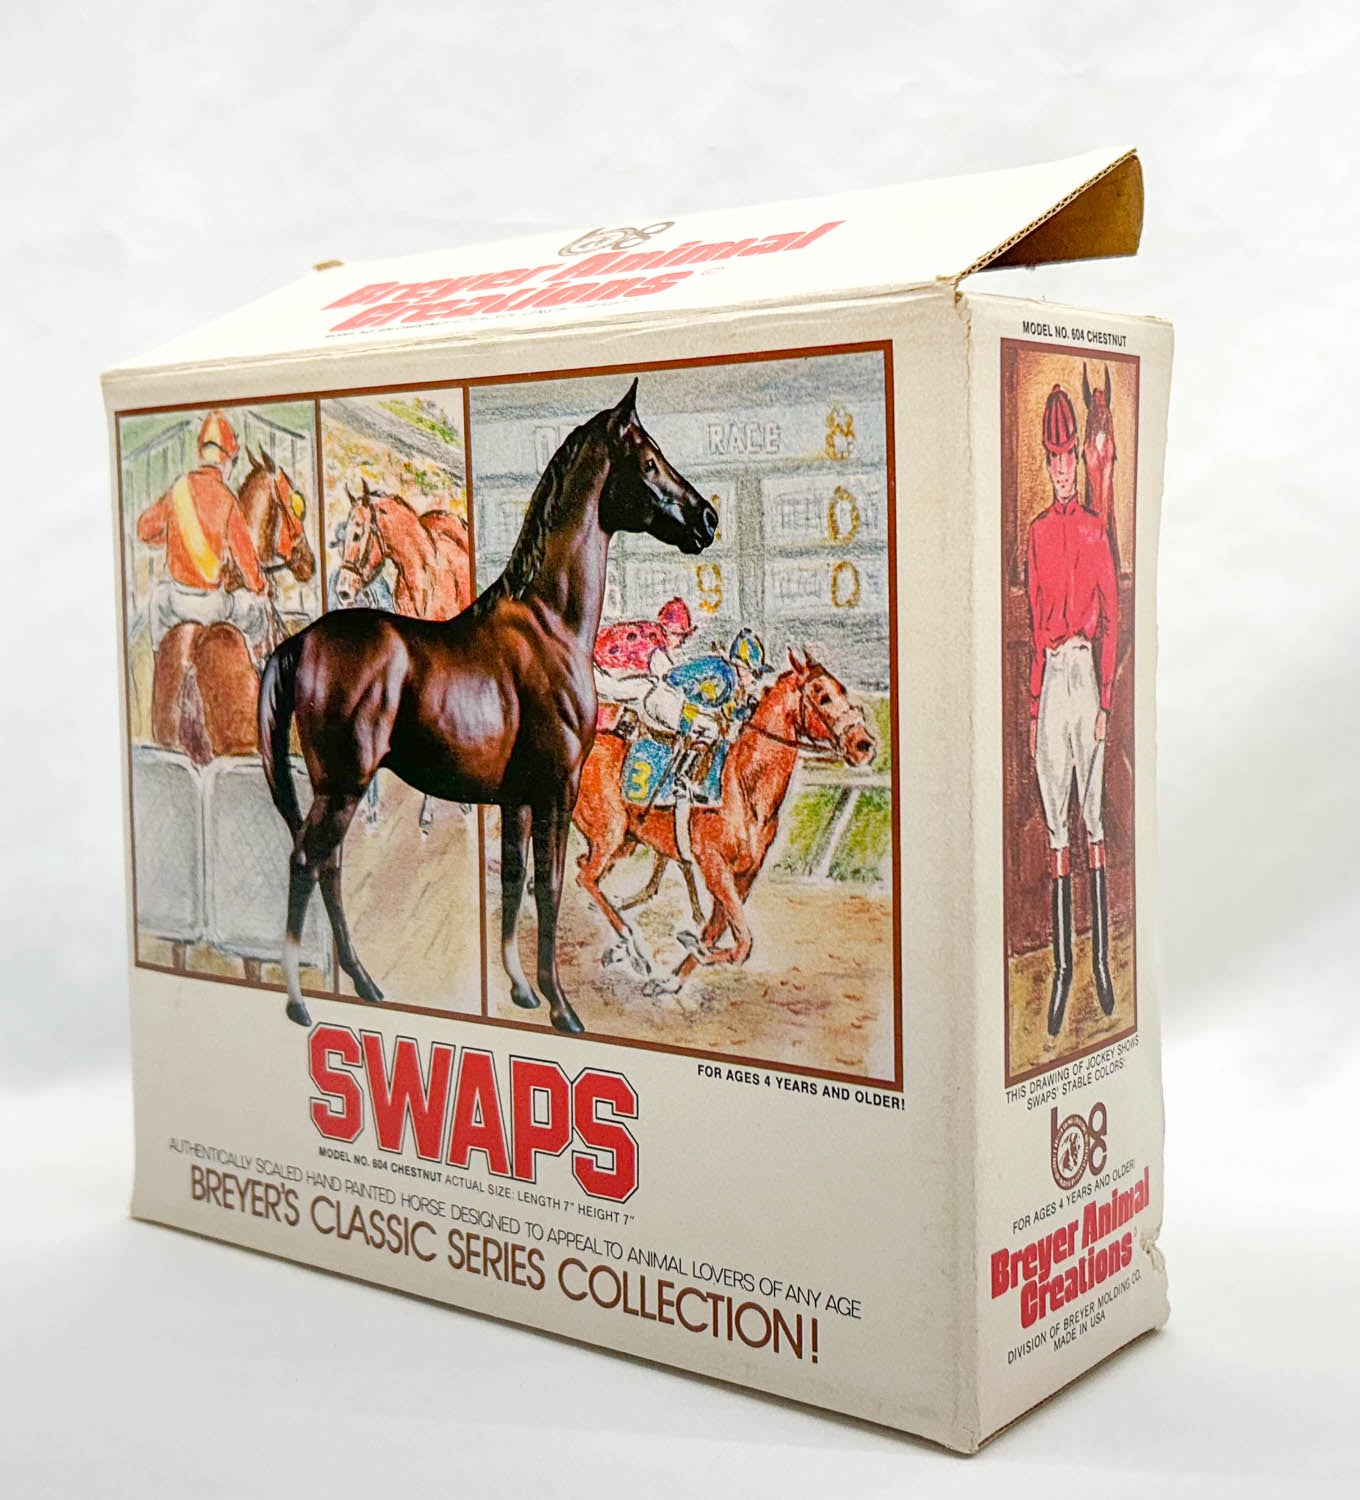 Breyer Box: Swaps - Early, Top Flap Box (sale for charity)